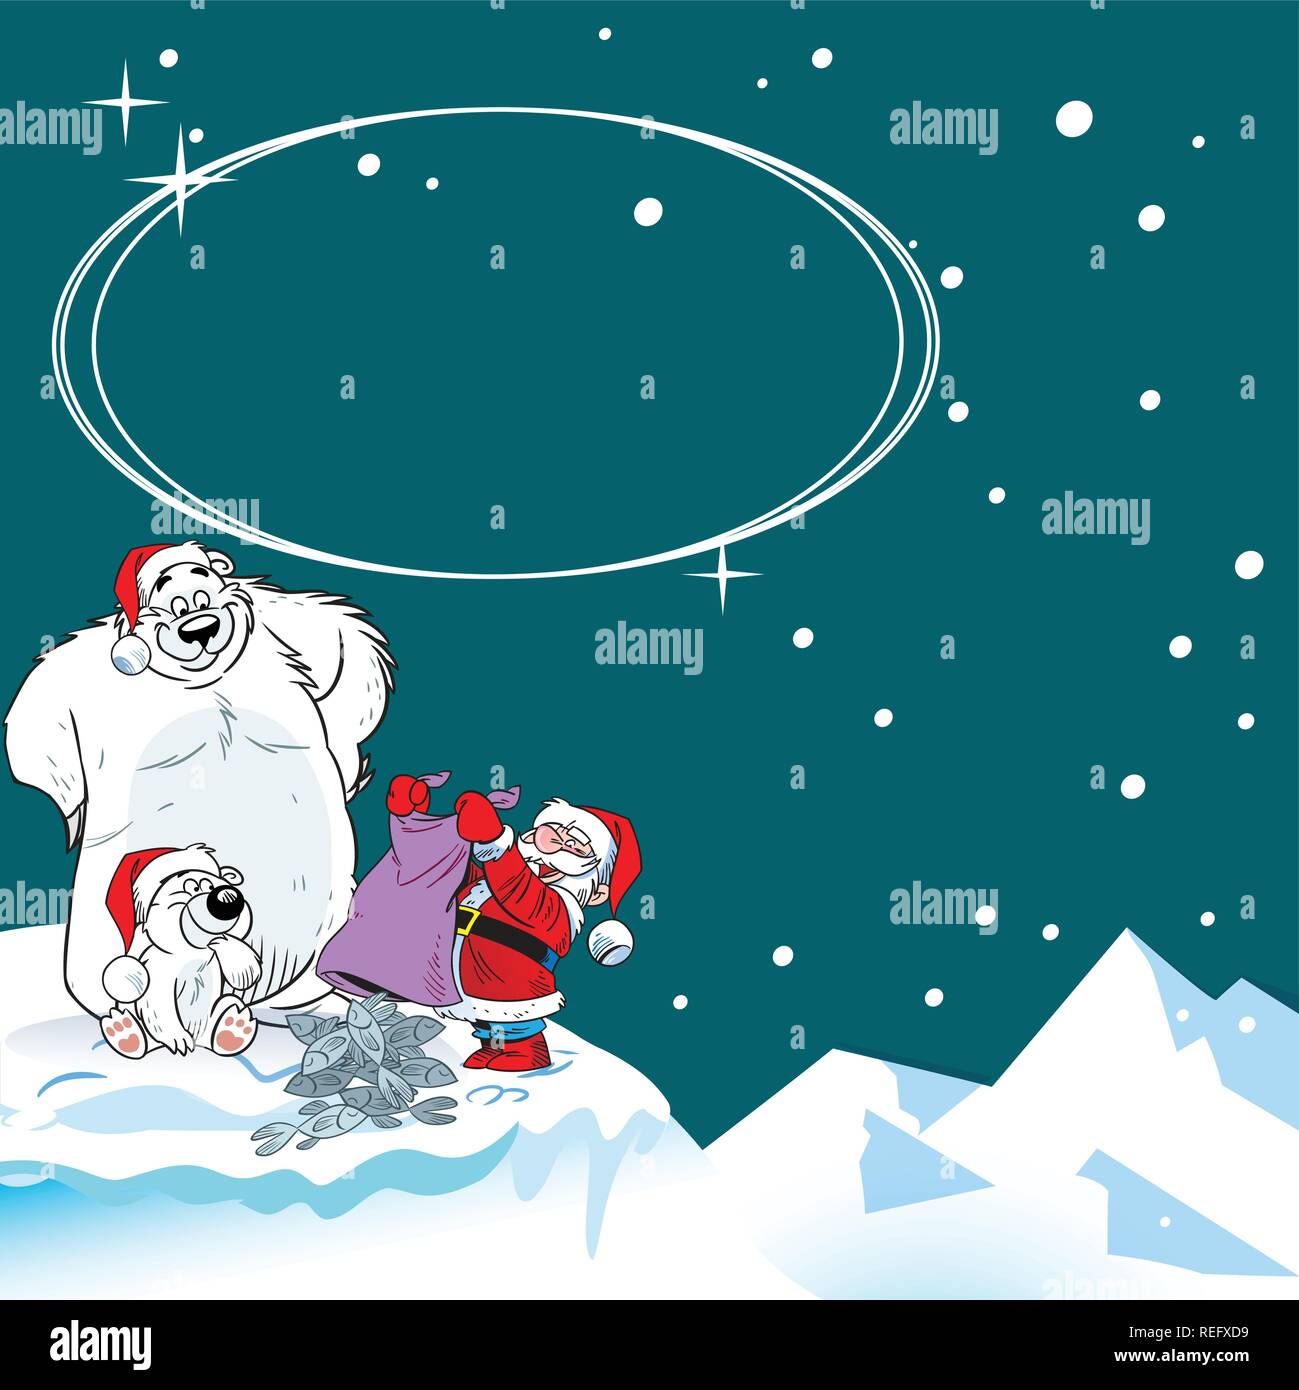 The illustration shows the polar polar bears, which brought Santa Claus Christmas gift. Illustration done in cartoon style cards with Christmas Stock Vector